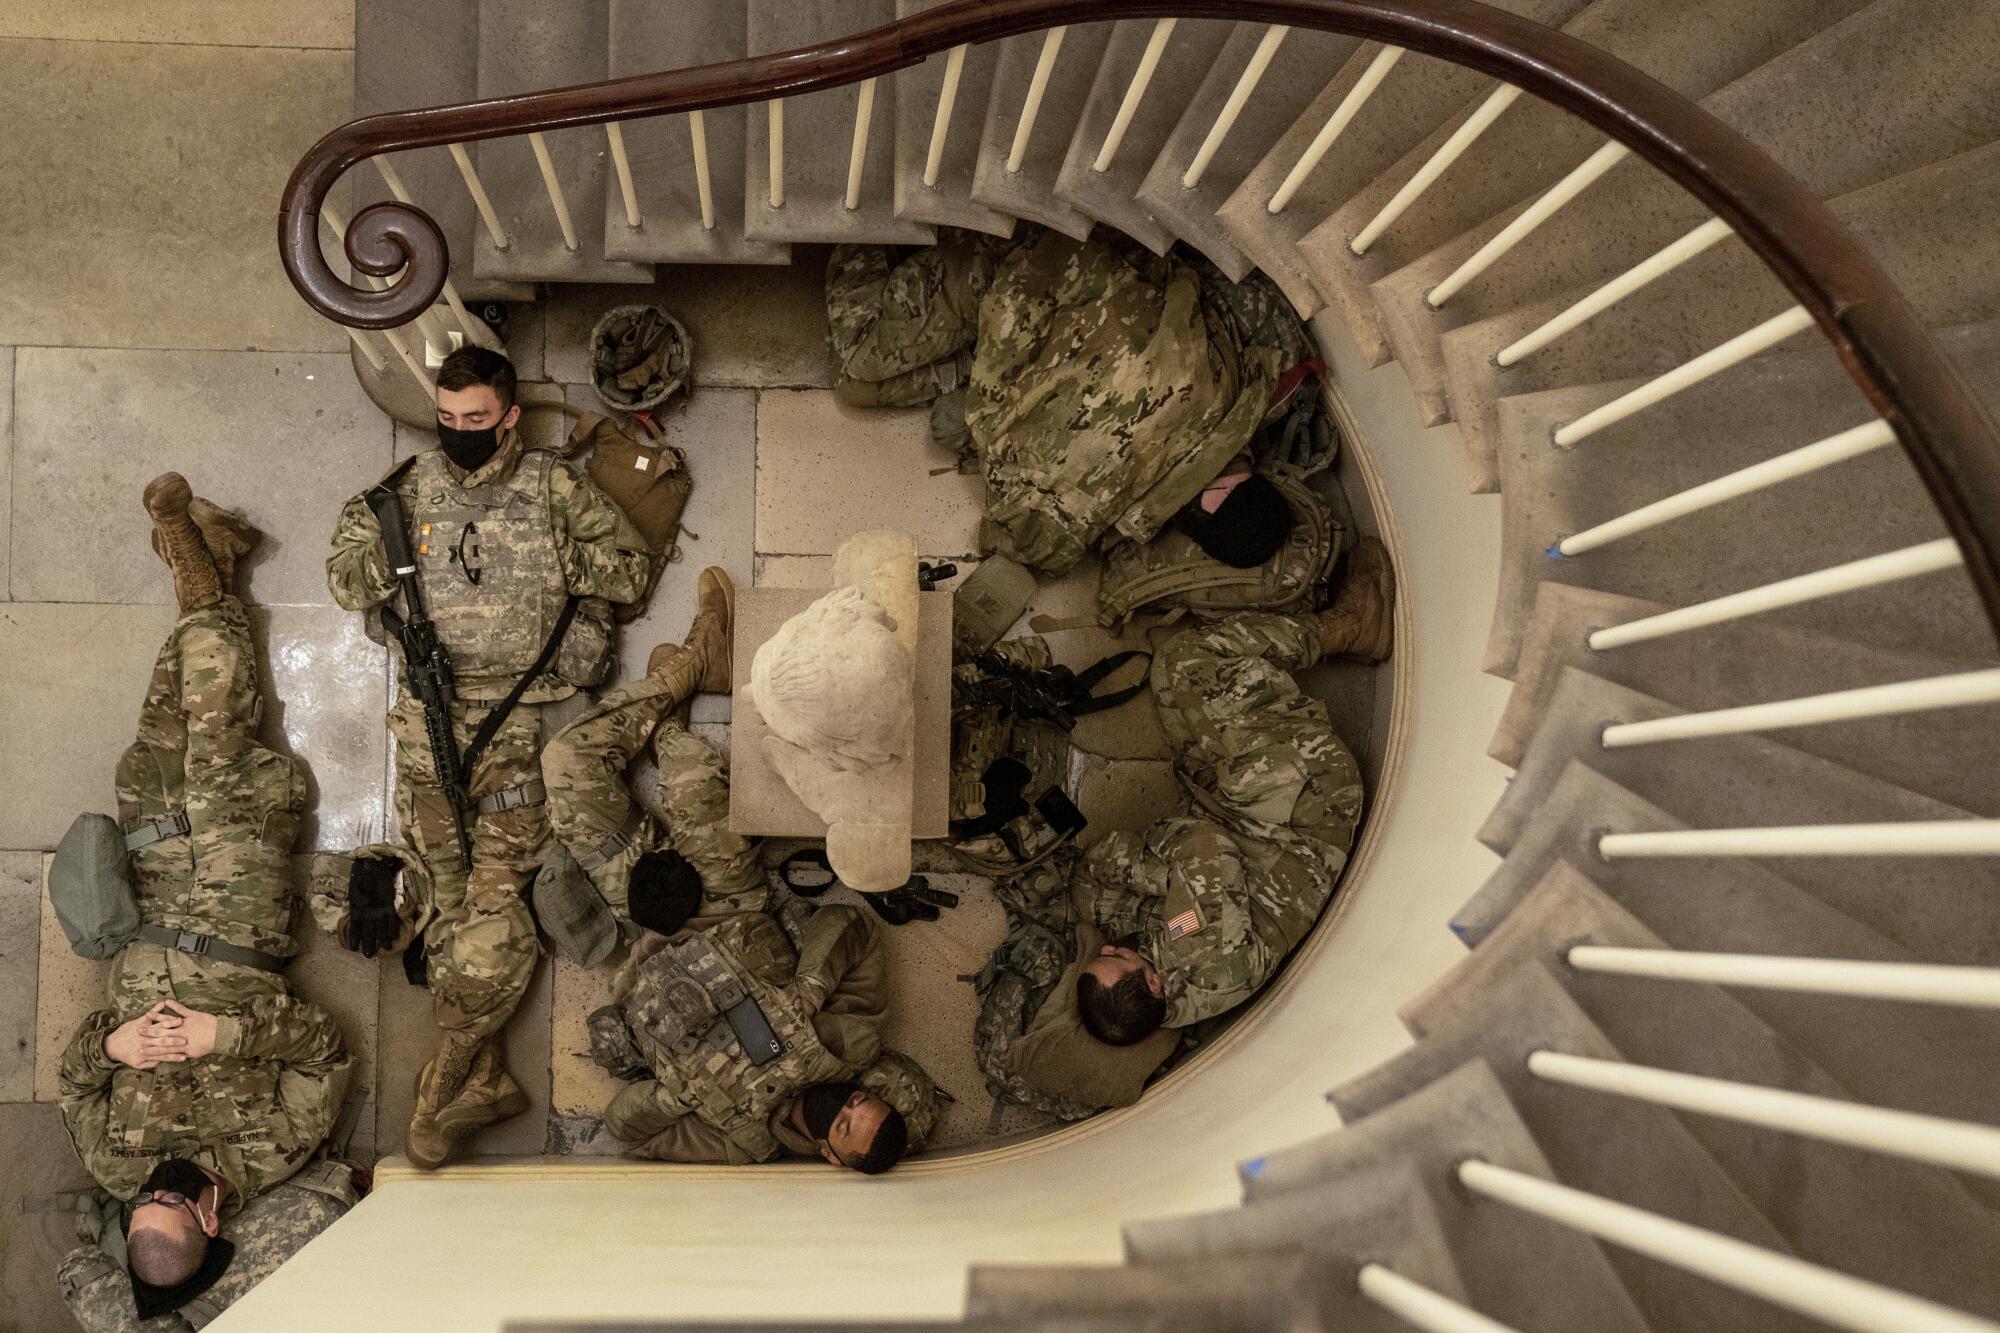 Members of the National Guard sleep at the bottom of a winding staircase